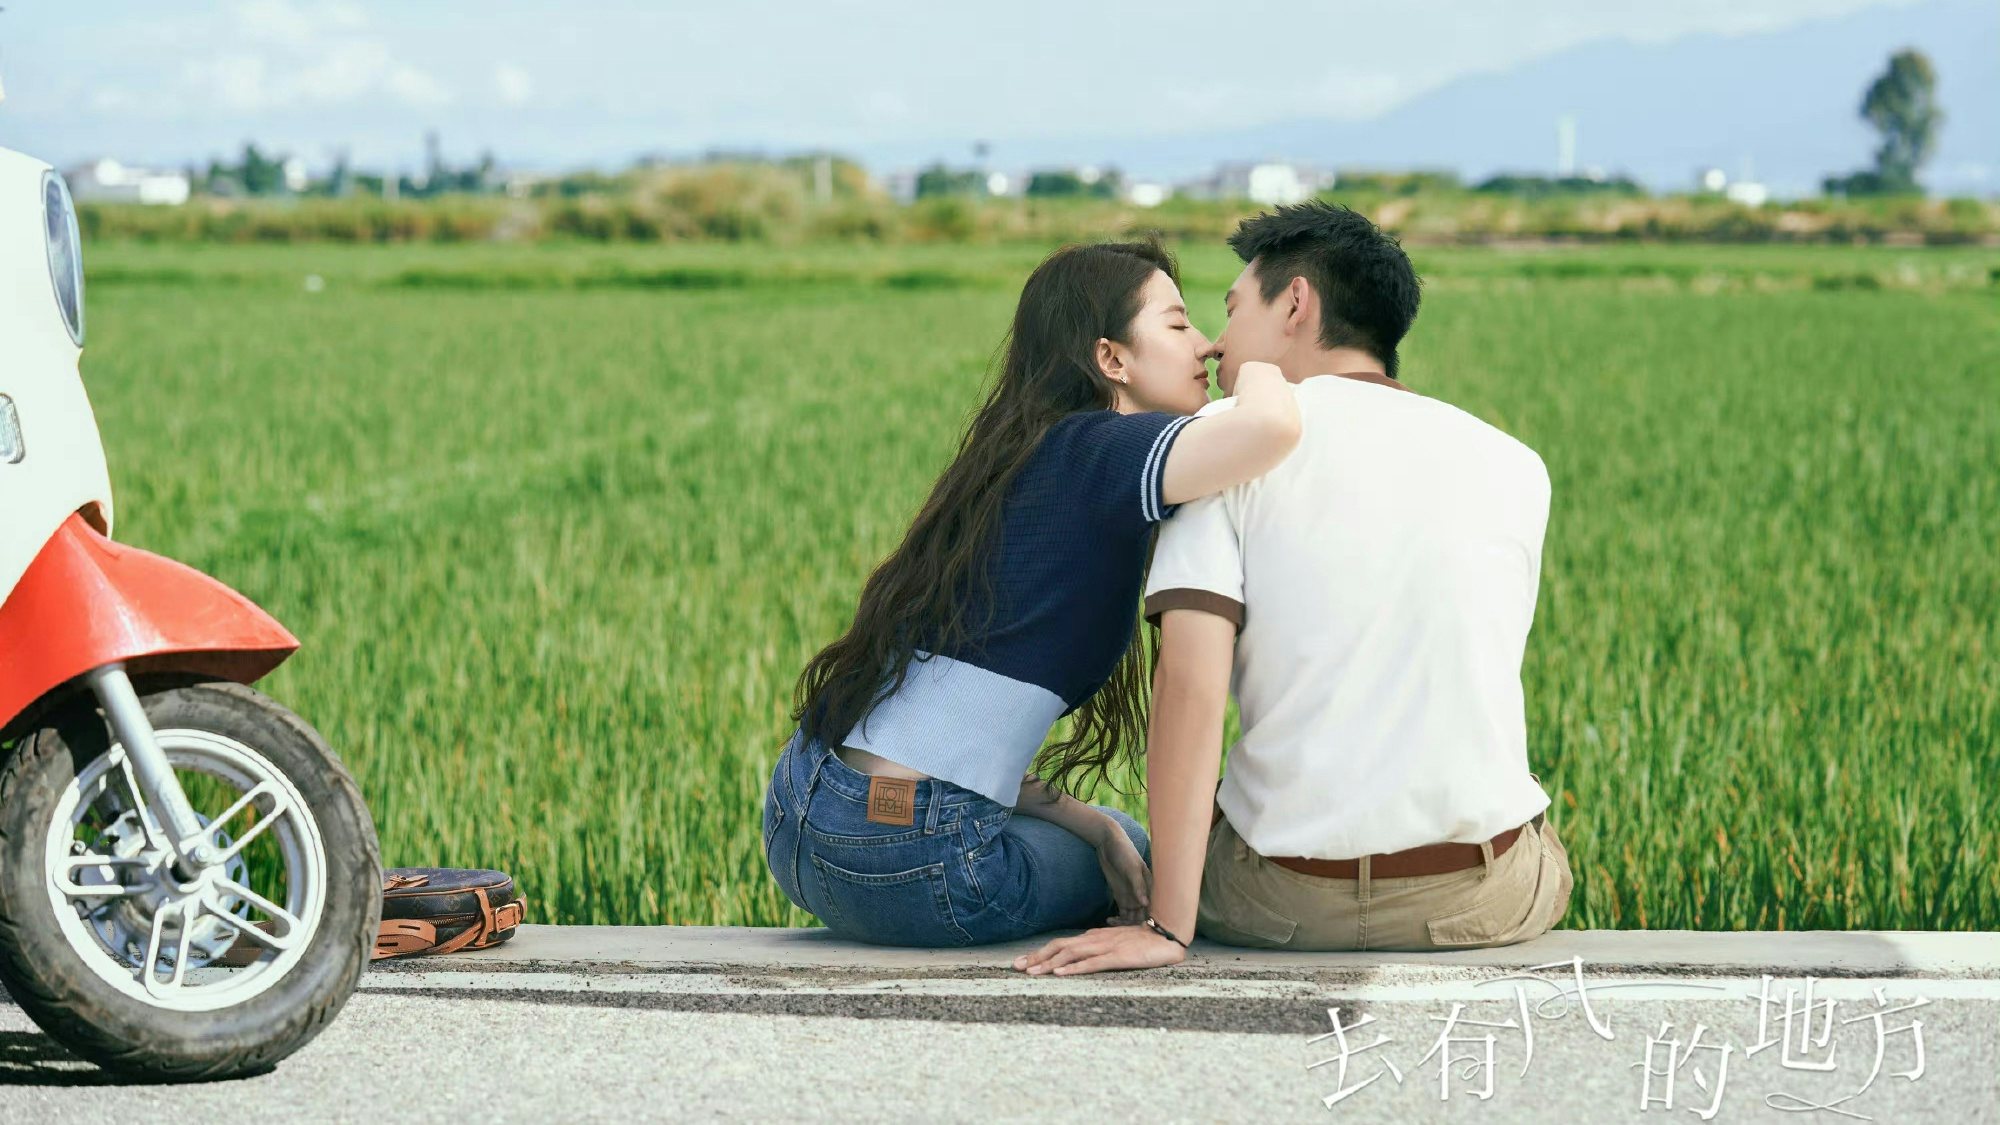 China's younger generations are yearning for rural escapism through the popular C-drama “Meet Yourself,” which has been viewed over 2 billion times. Photo: Meet Yourself, MangoTV